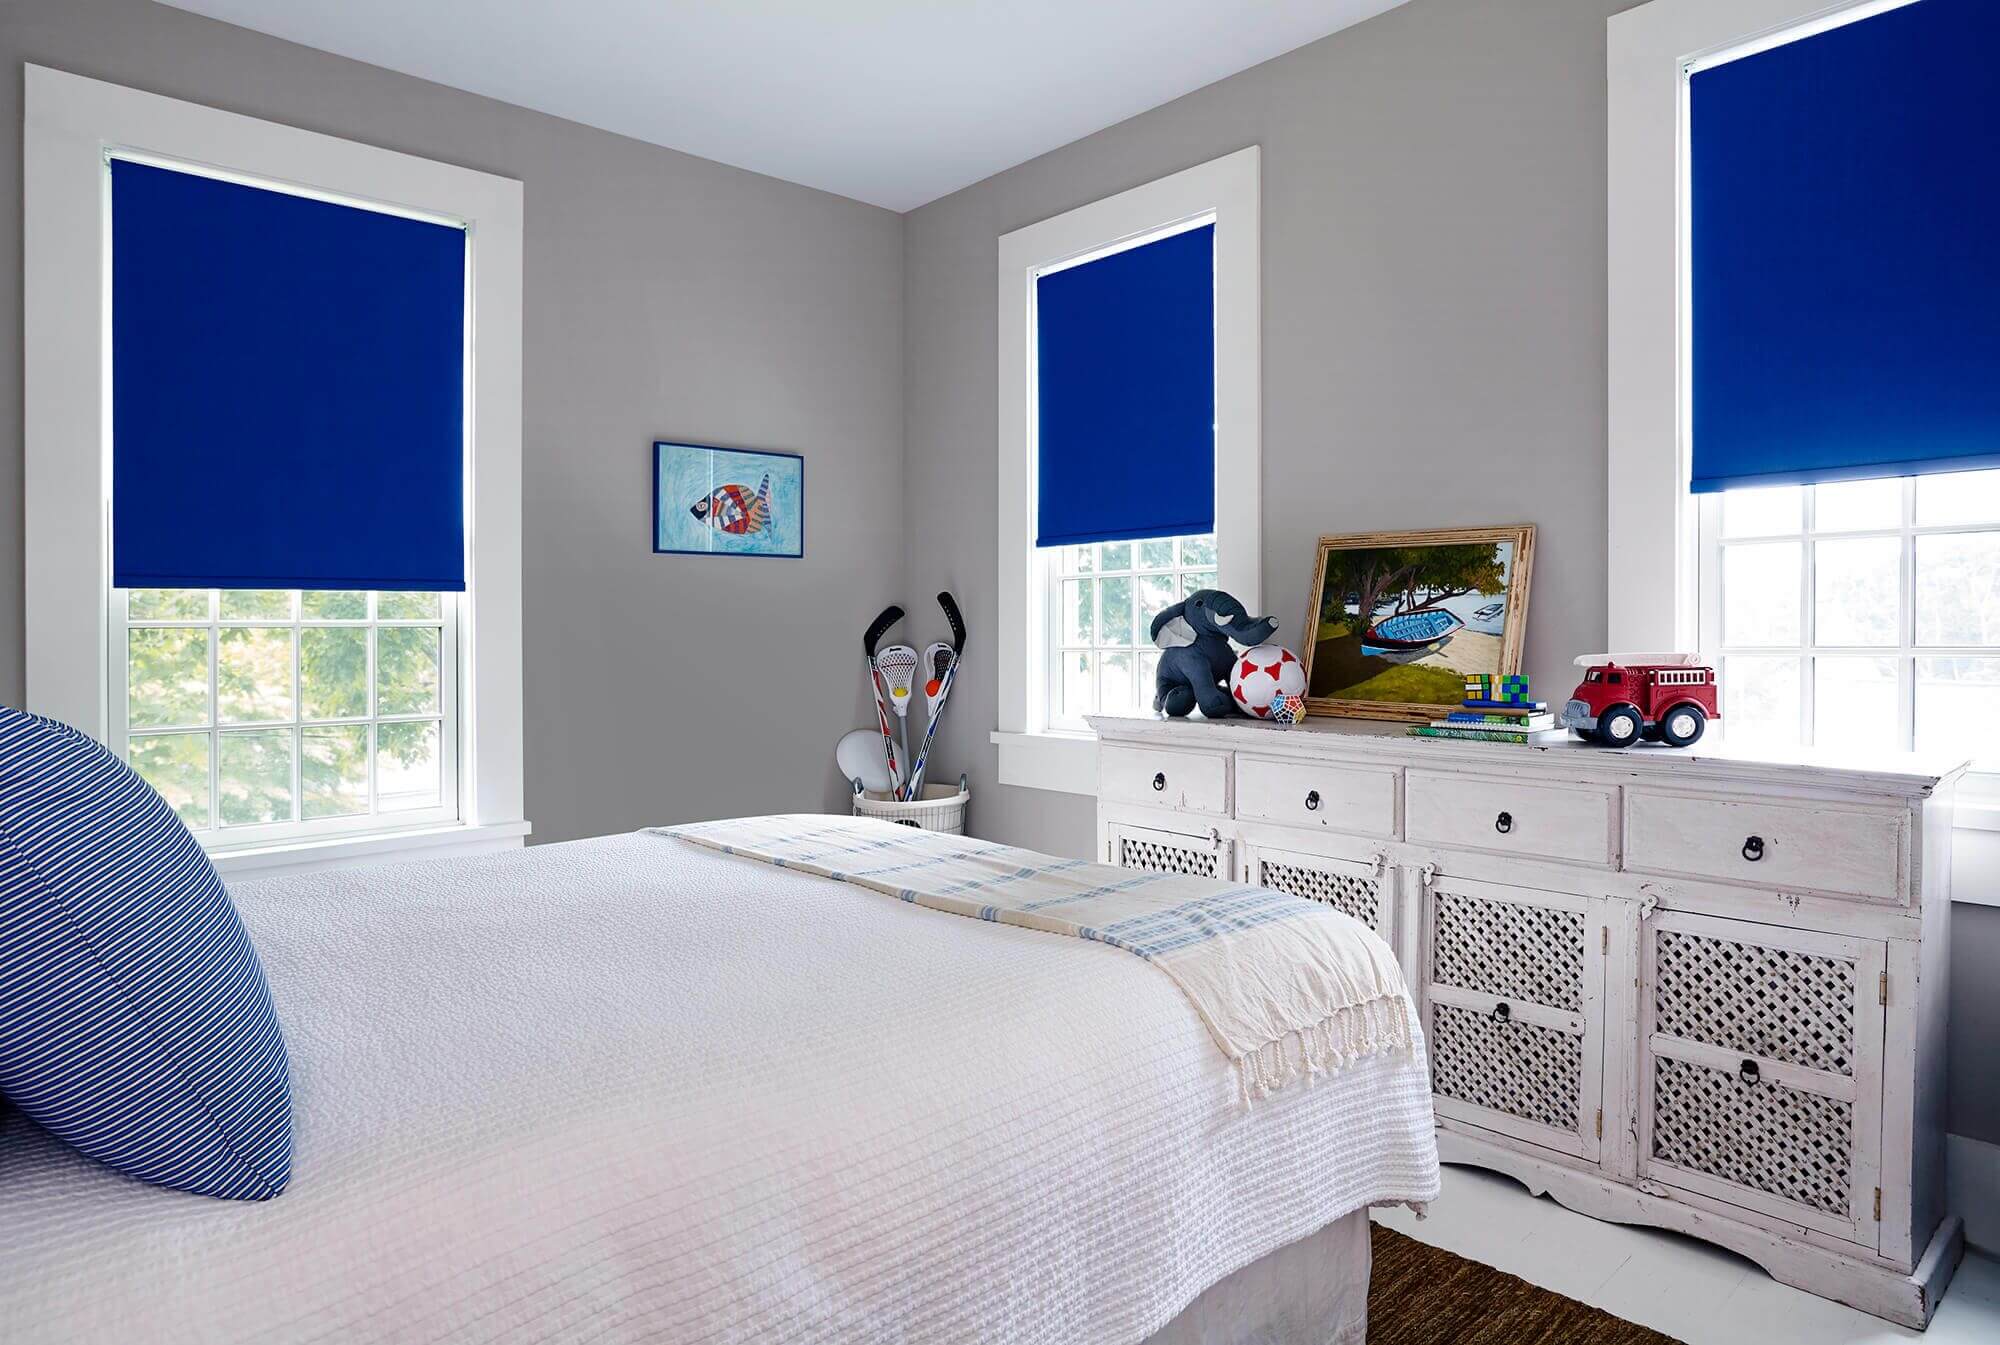 Custom roller shades provide the perfect balance of light and darkness for a child's bedroom.